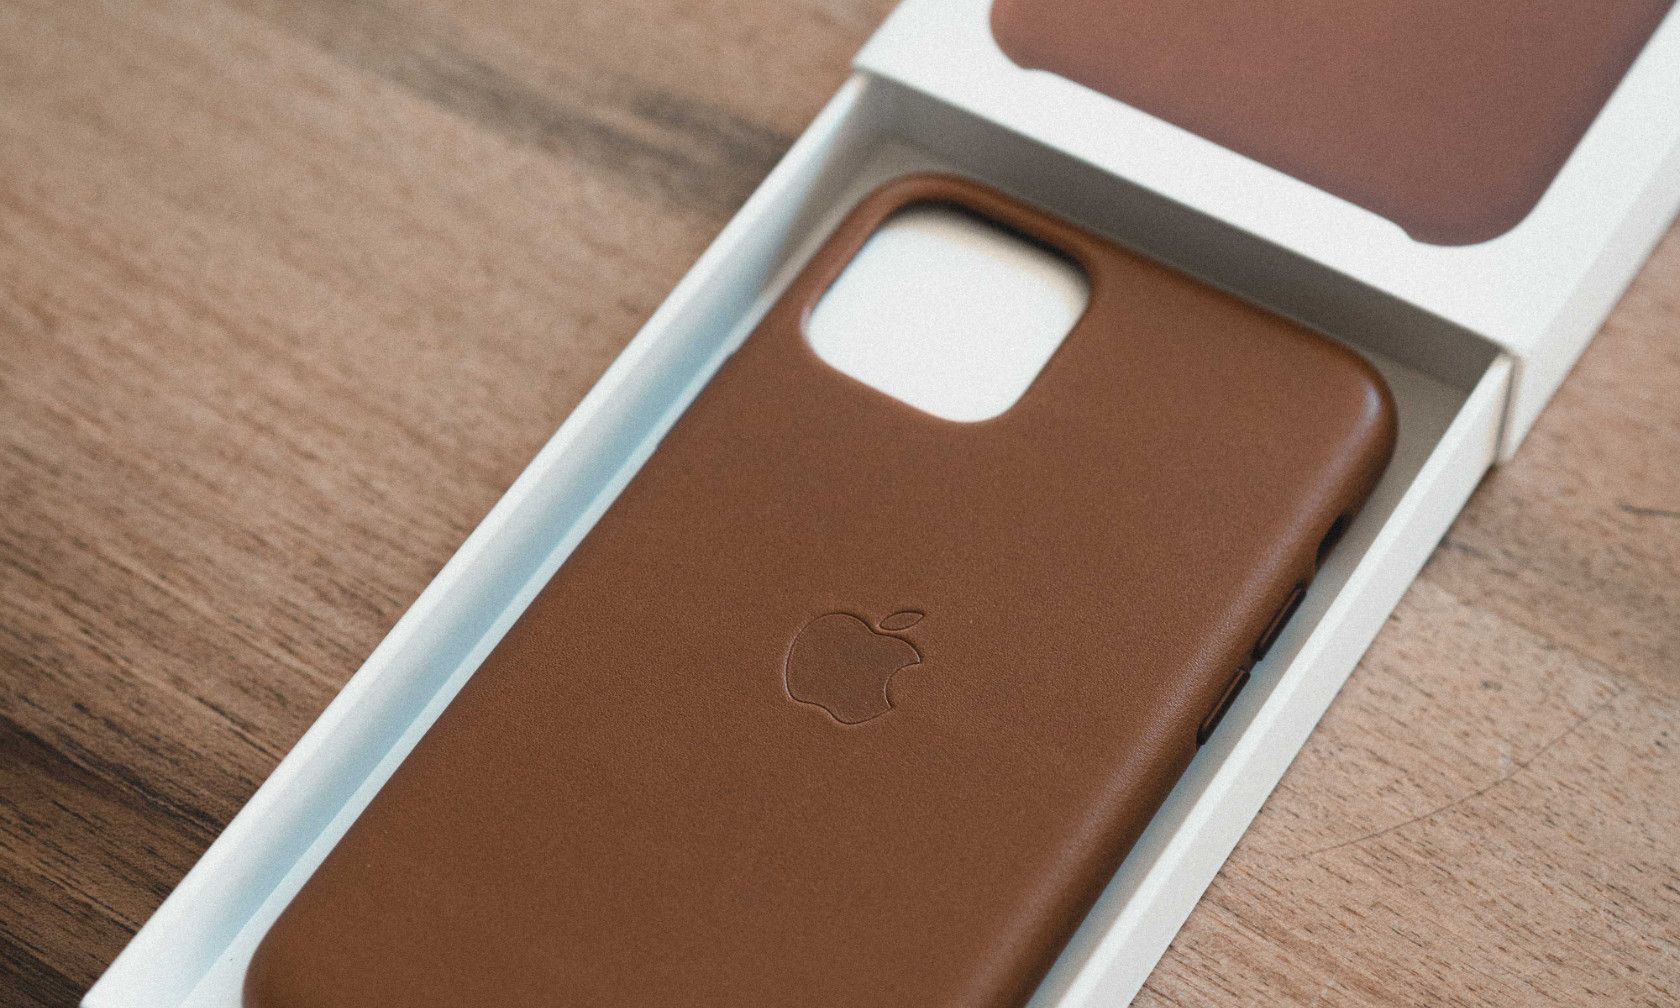 iPhone leather case in box